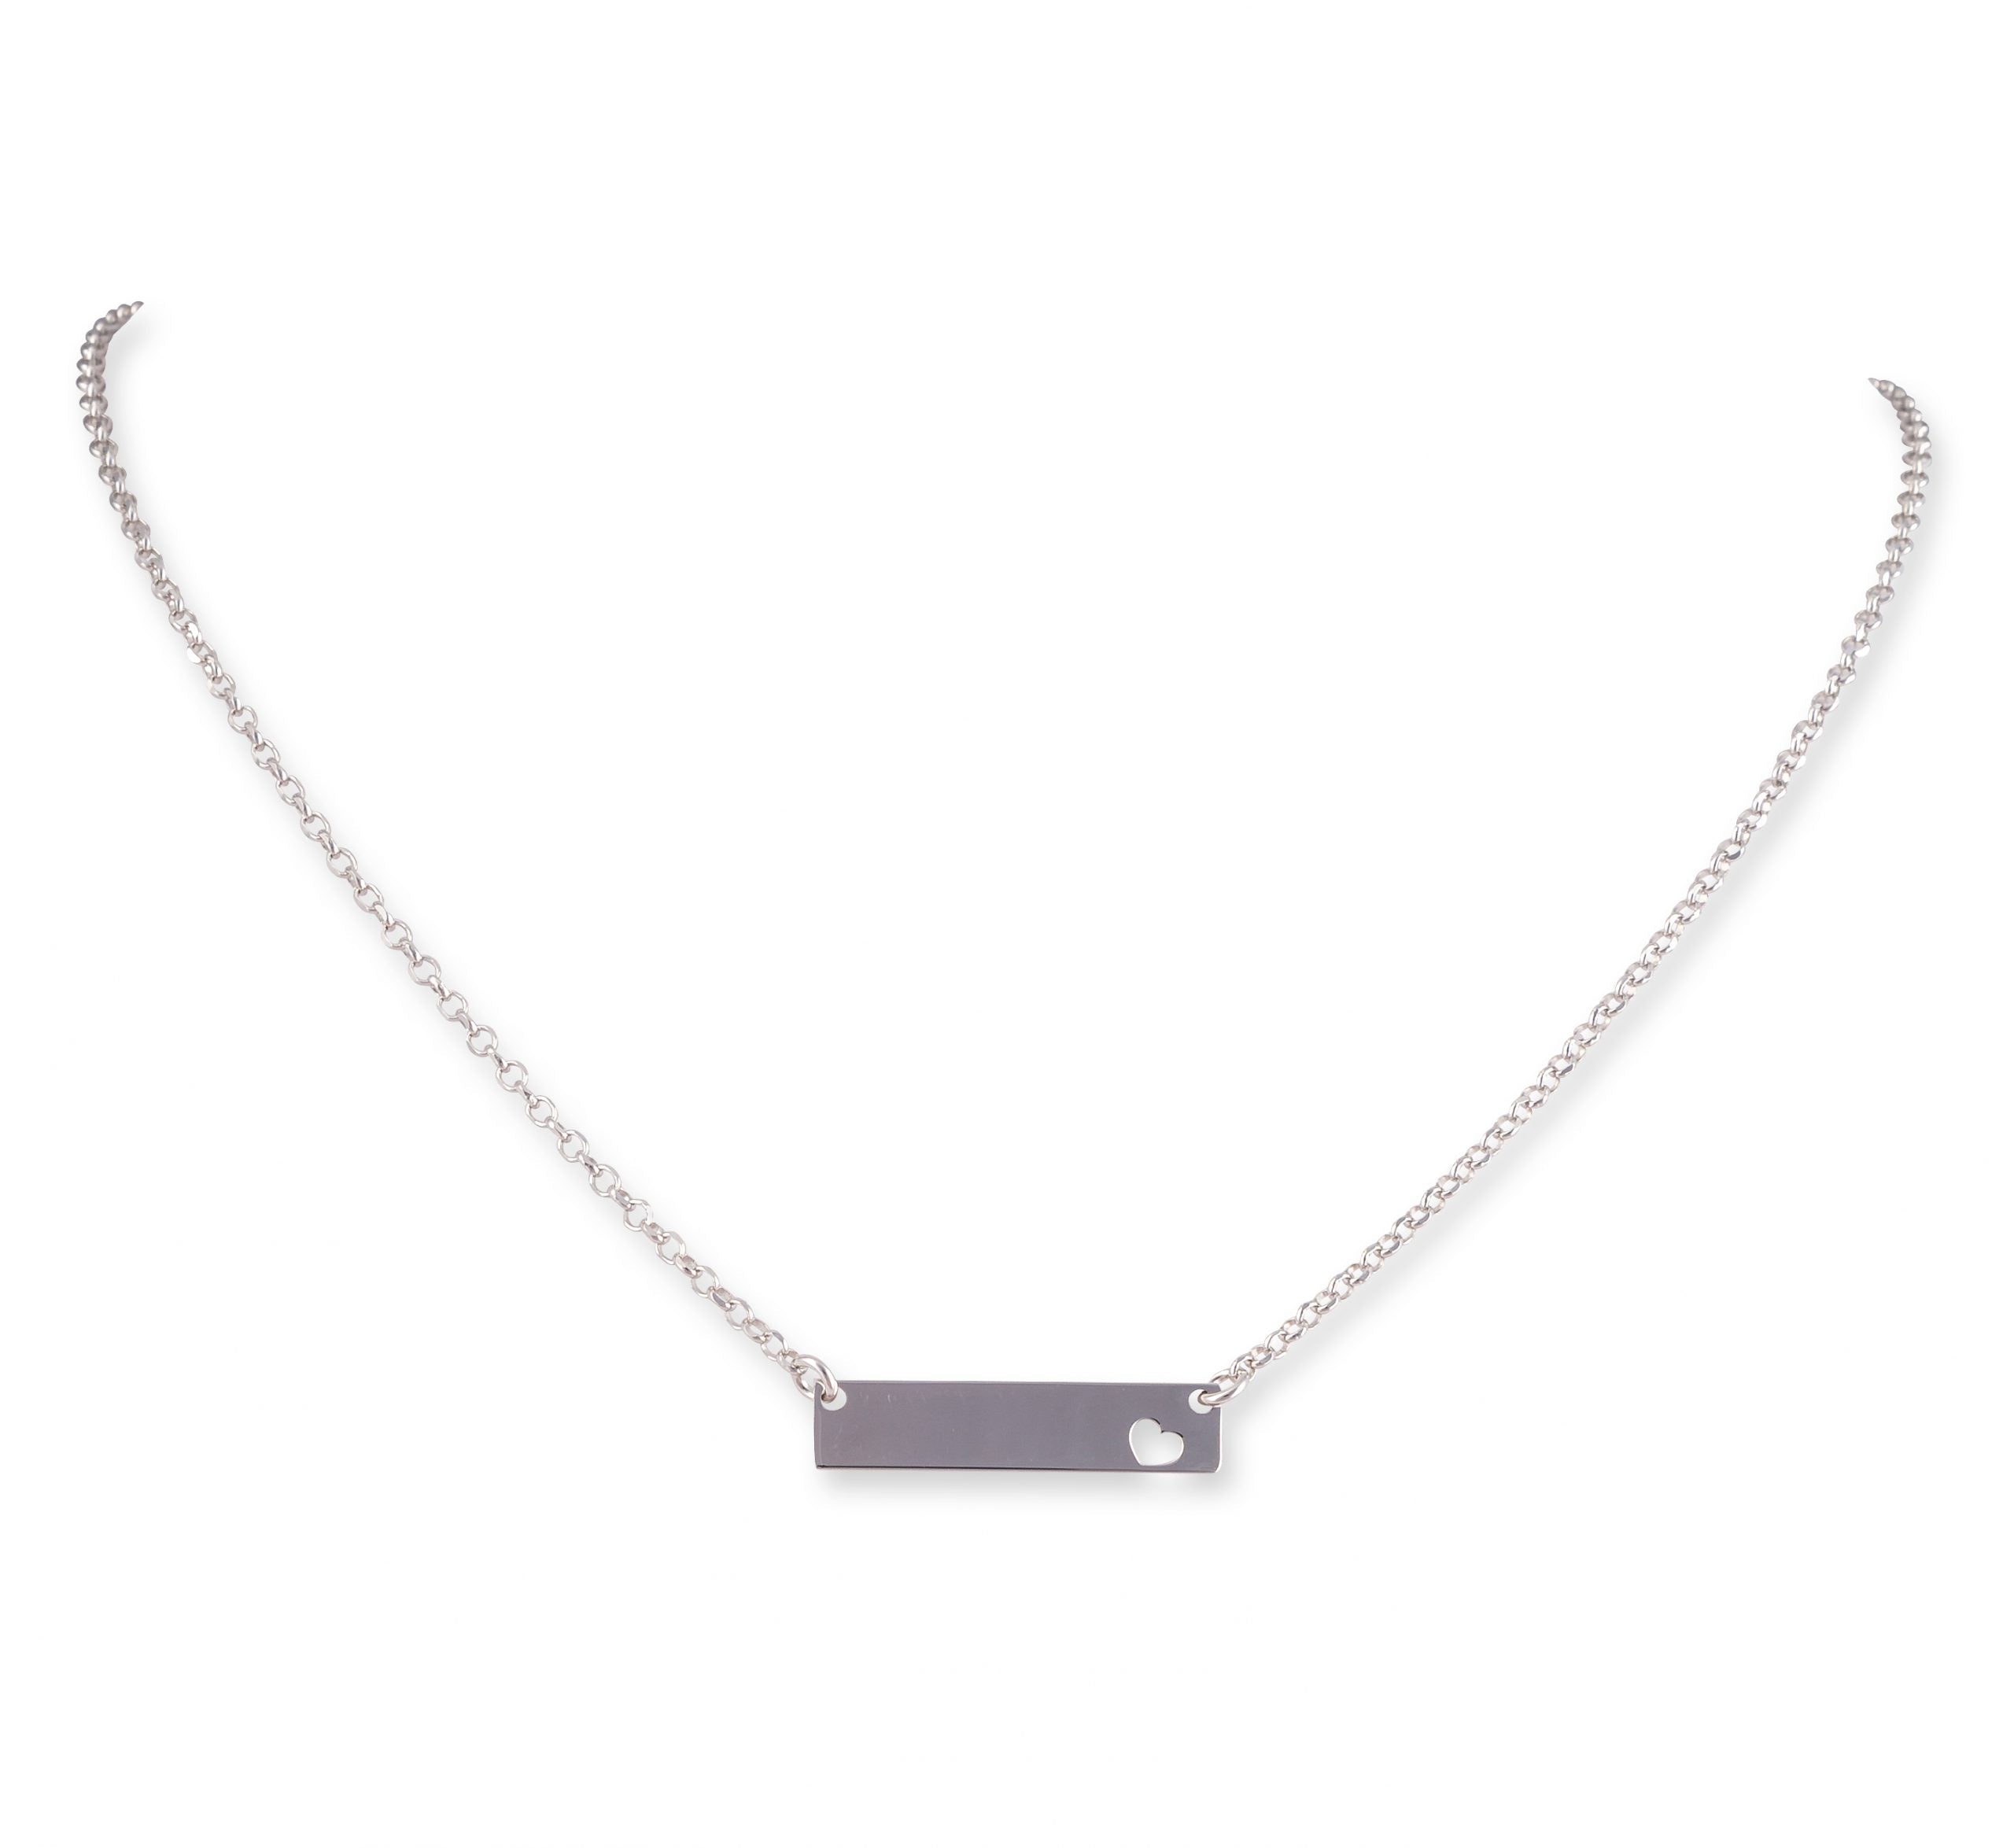 Engraveable Silver Necklace with Silver Plaque